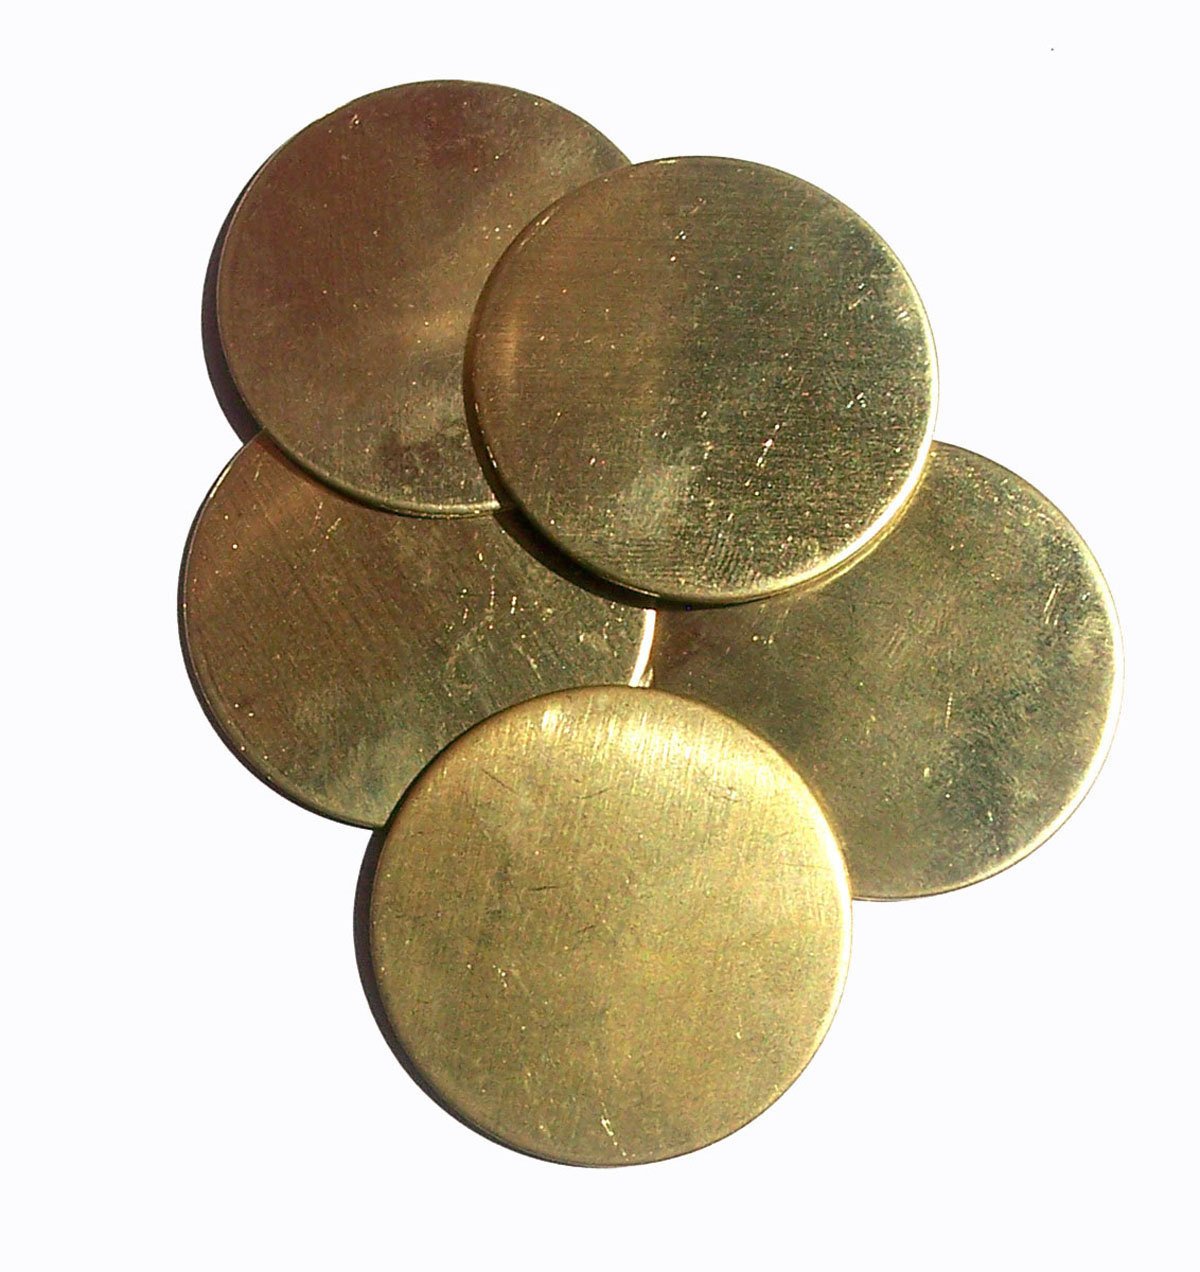 30mm Brass Disc Blank 22G Enameling Soldering Stamping Texturing Blanks - Jewelry Supplies - 5 Pieces